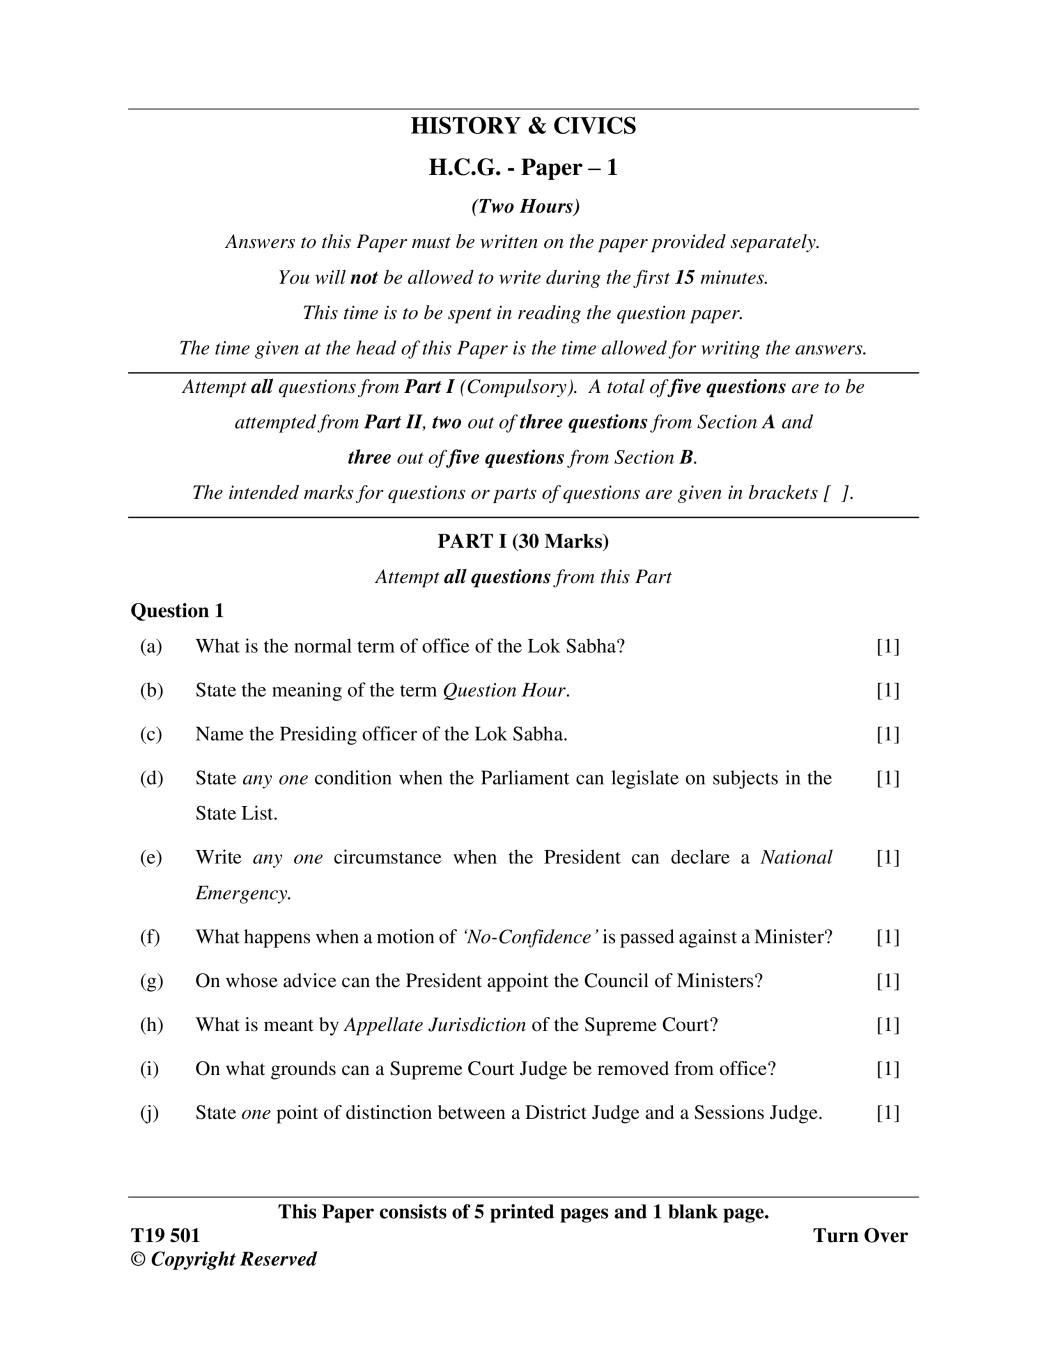 ICSE Class 10 Question Paper 2019 for History & Civics  - Page 1